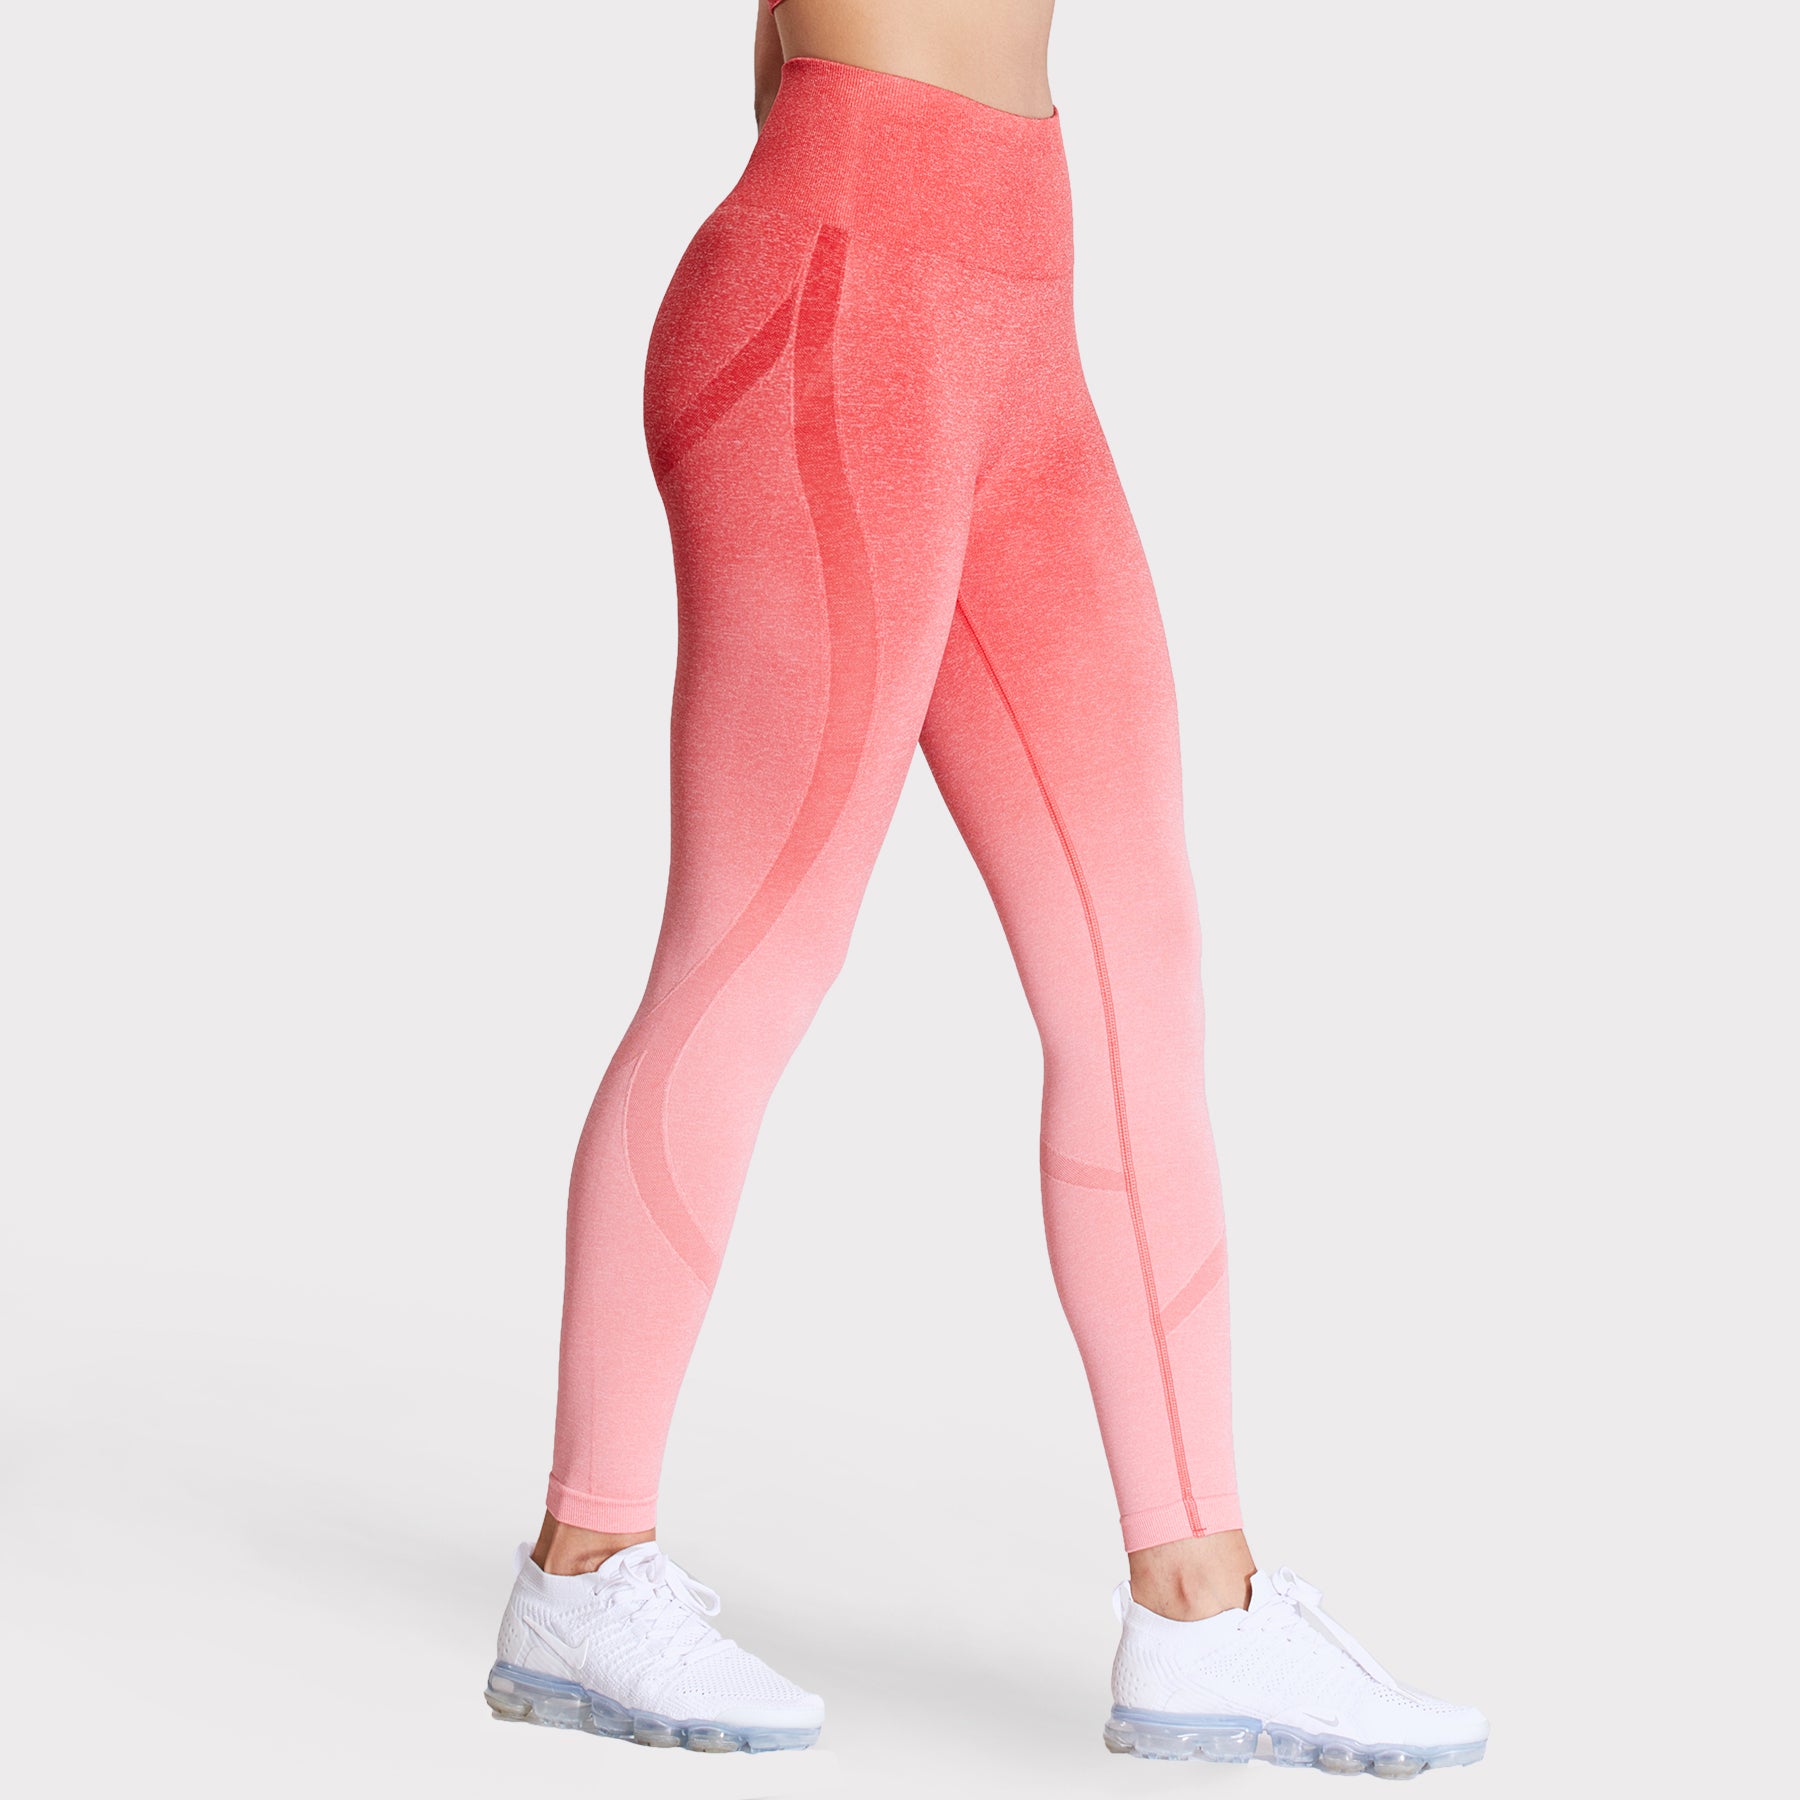 Ombre Seamless High Waisted Leggings & Sports Bra Set Pink or Turquoise